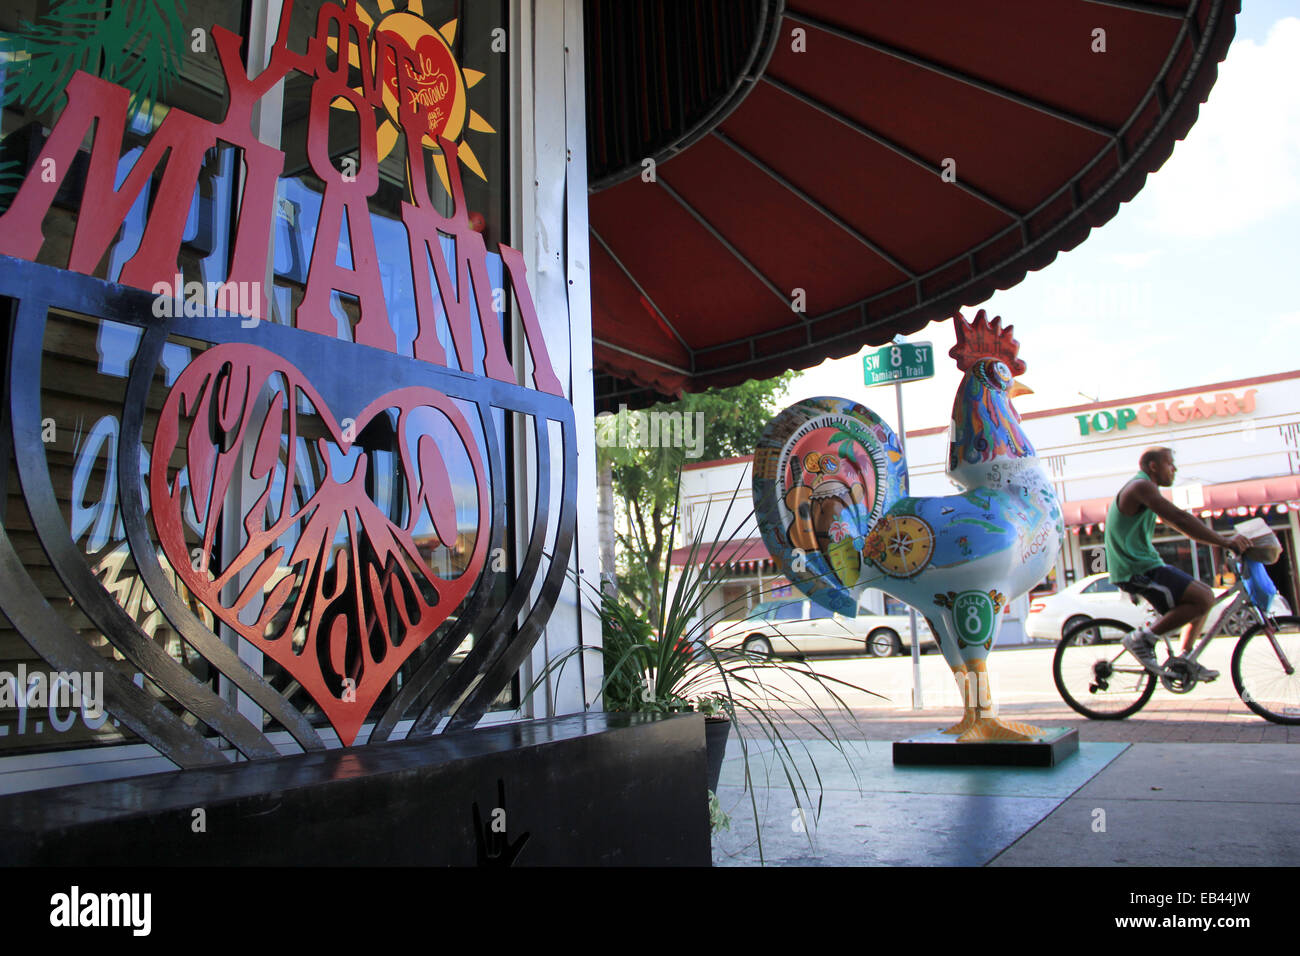 A cyclist passes a wooden sculpture of a rooster in the Little Havana neighborhood of Miami, Florida. Stock Photo